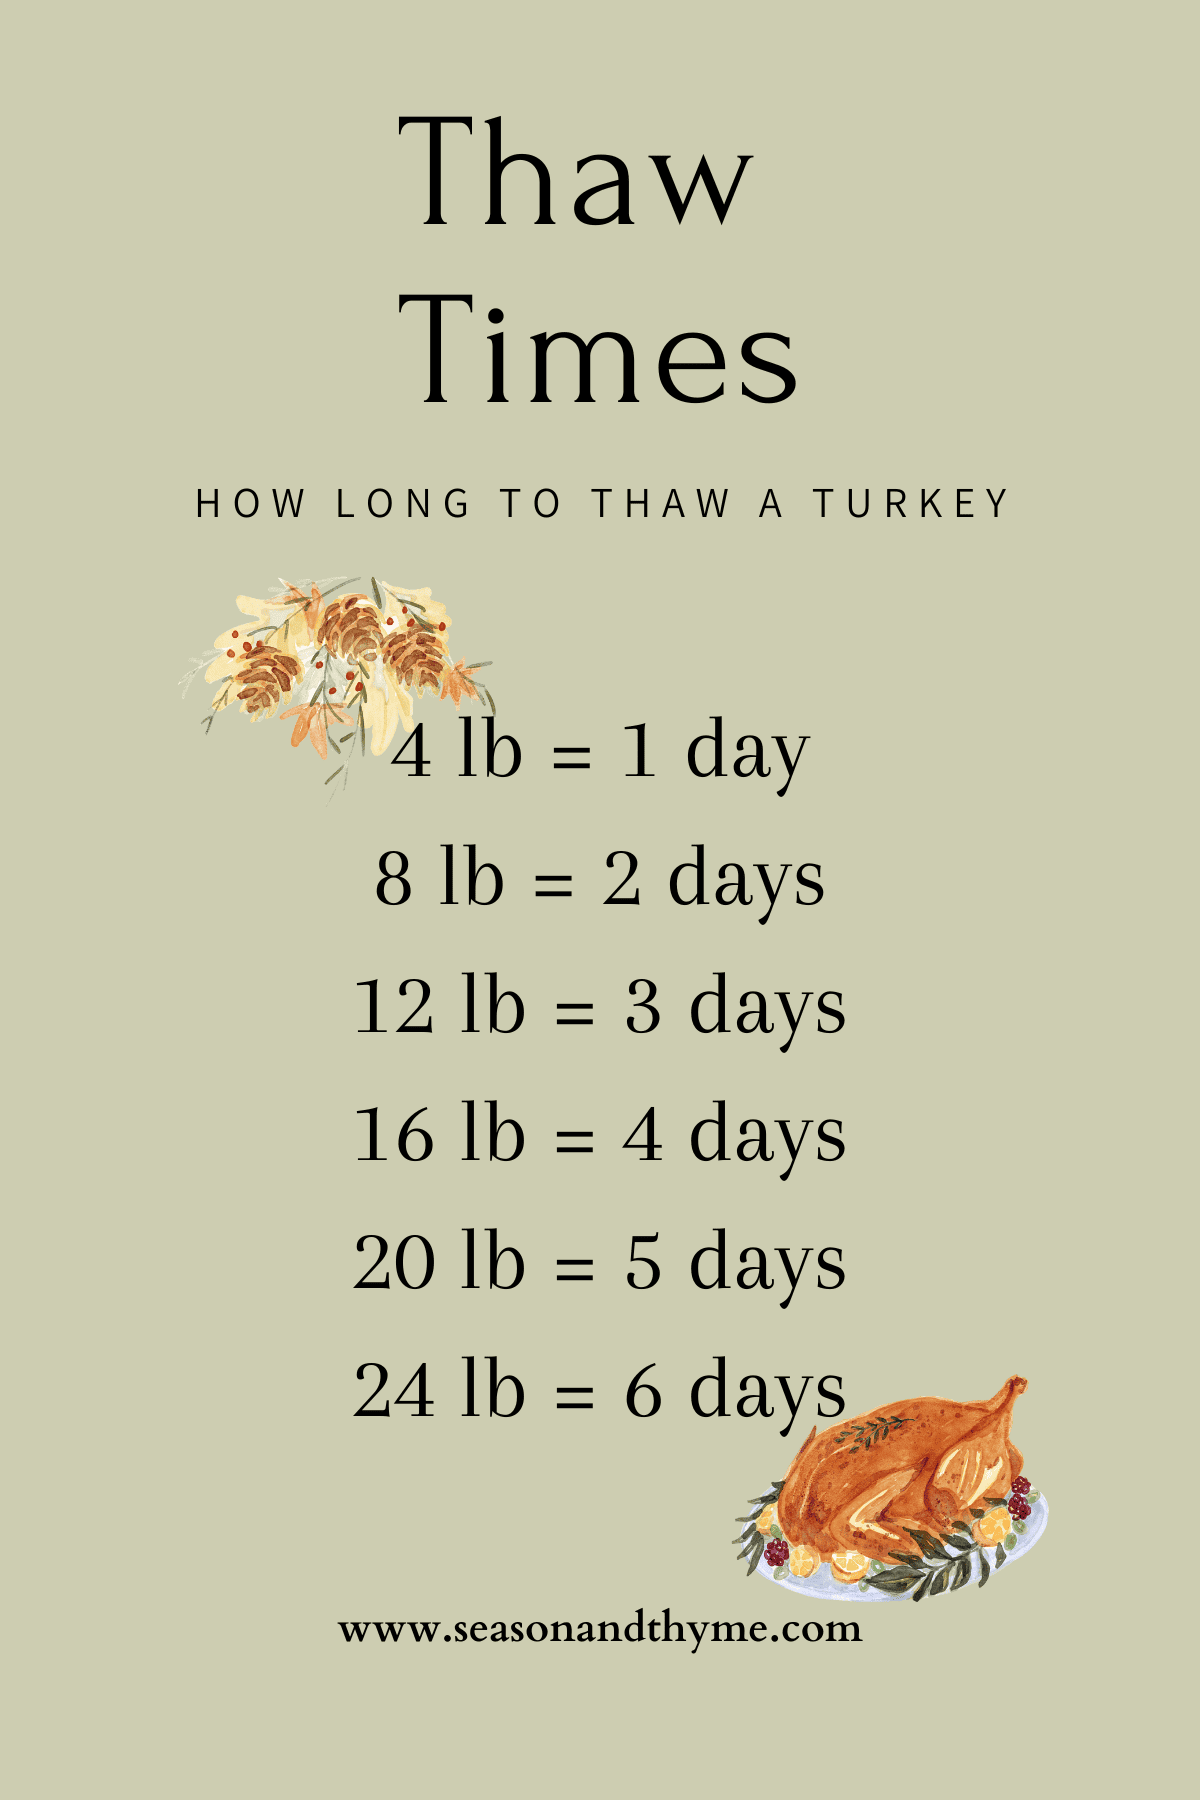 Graphic showing how long to thaw a turkey depending on pounds. 